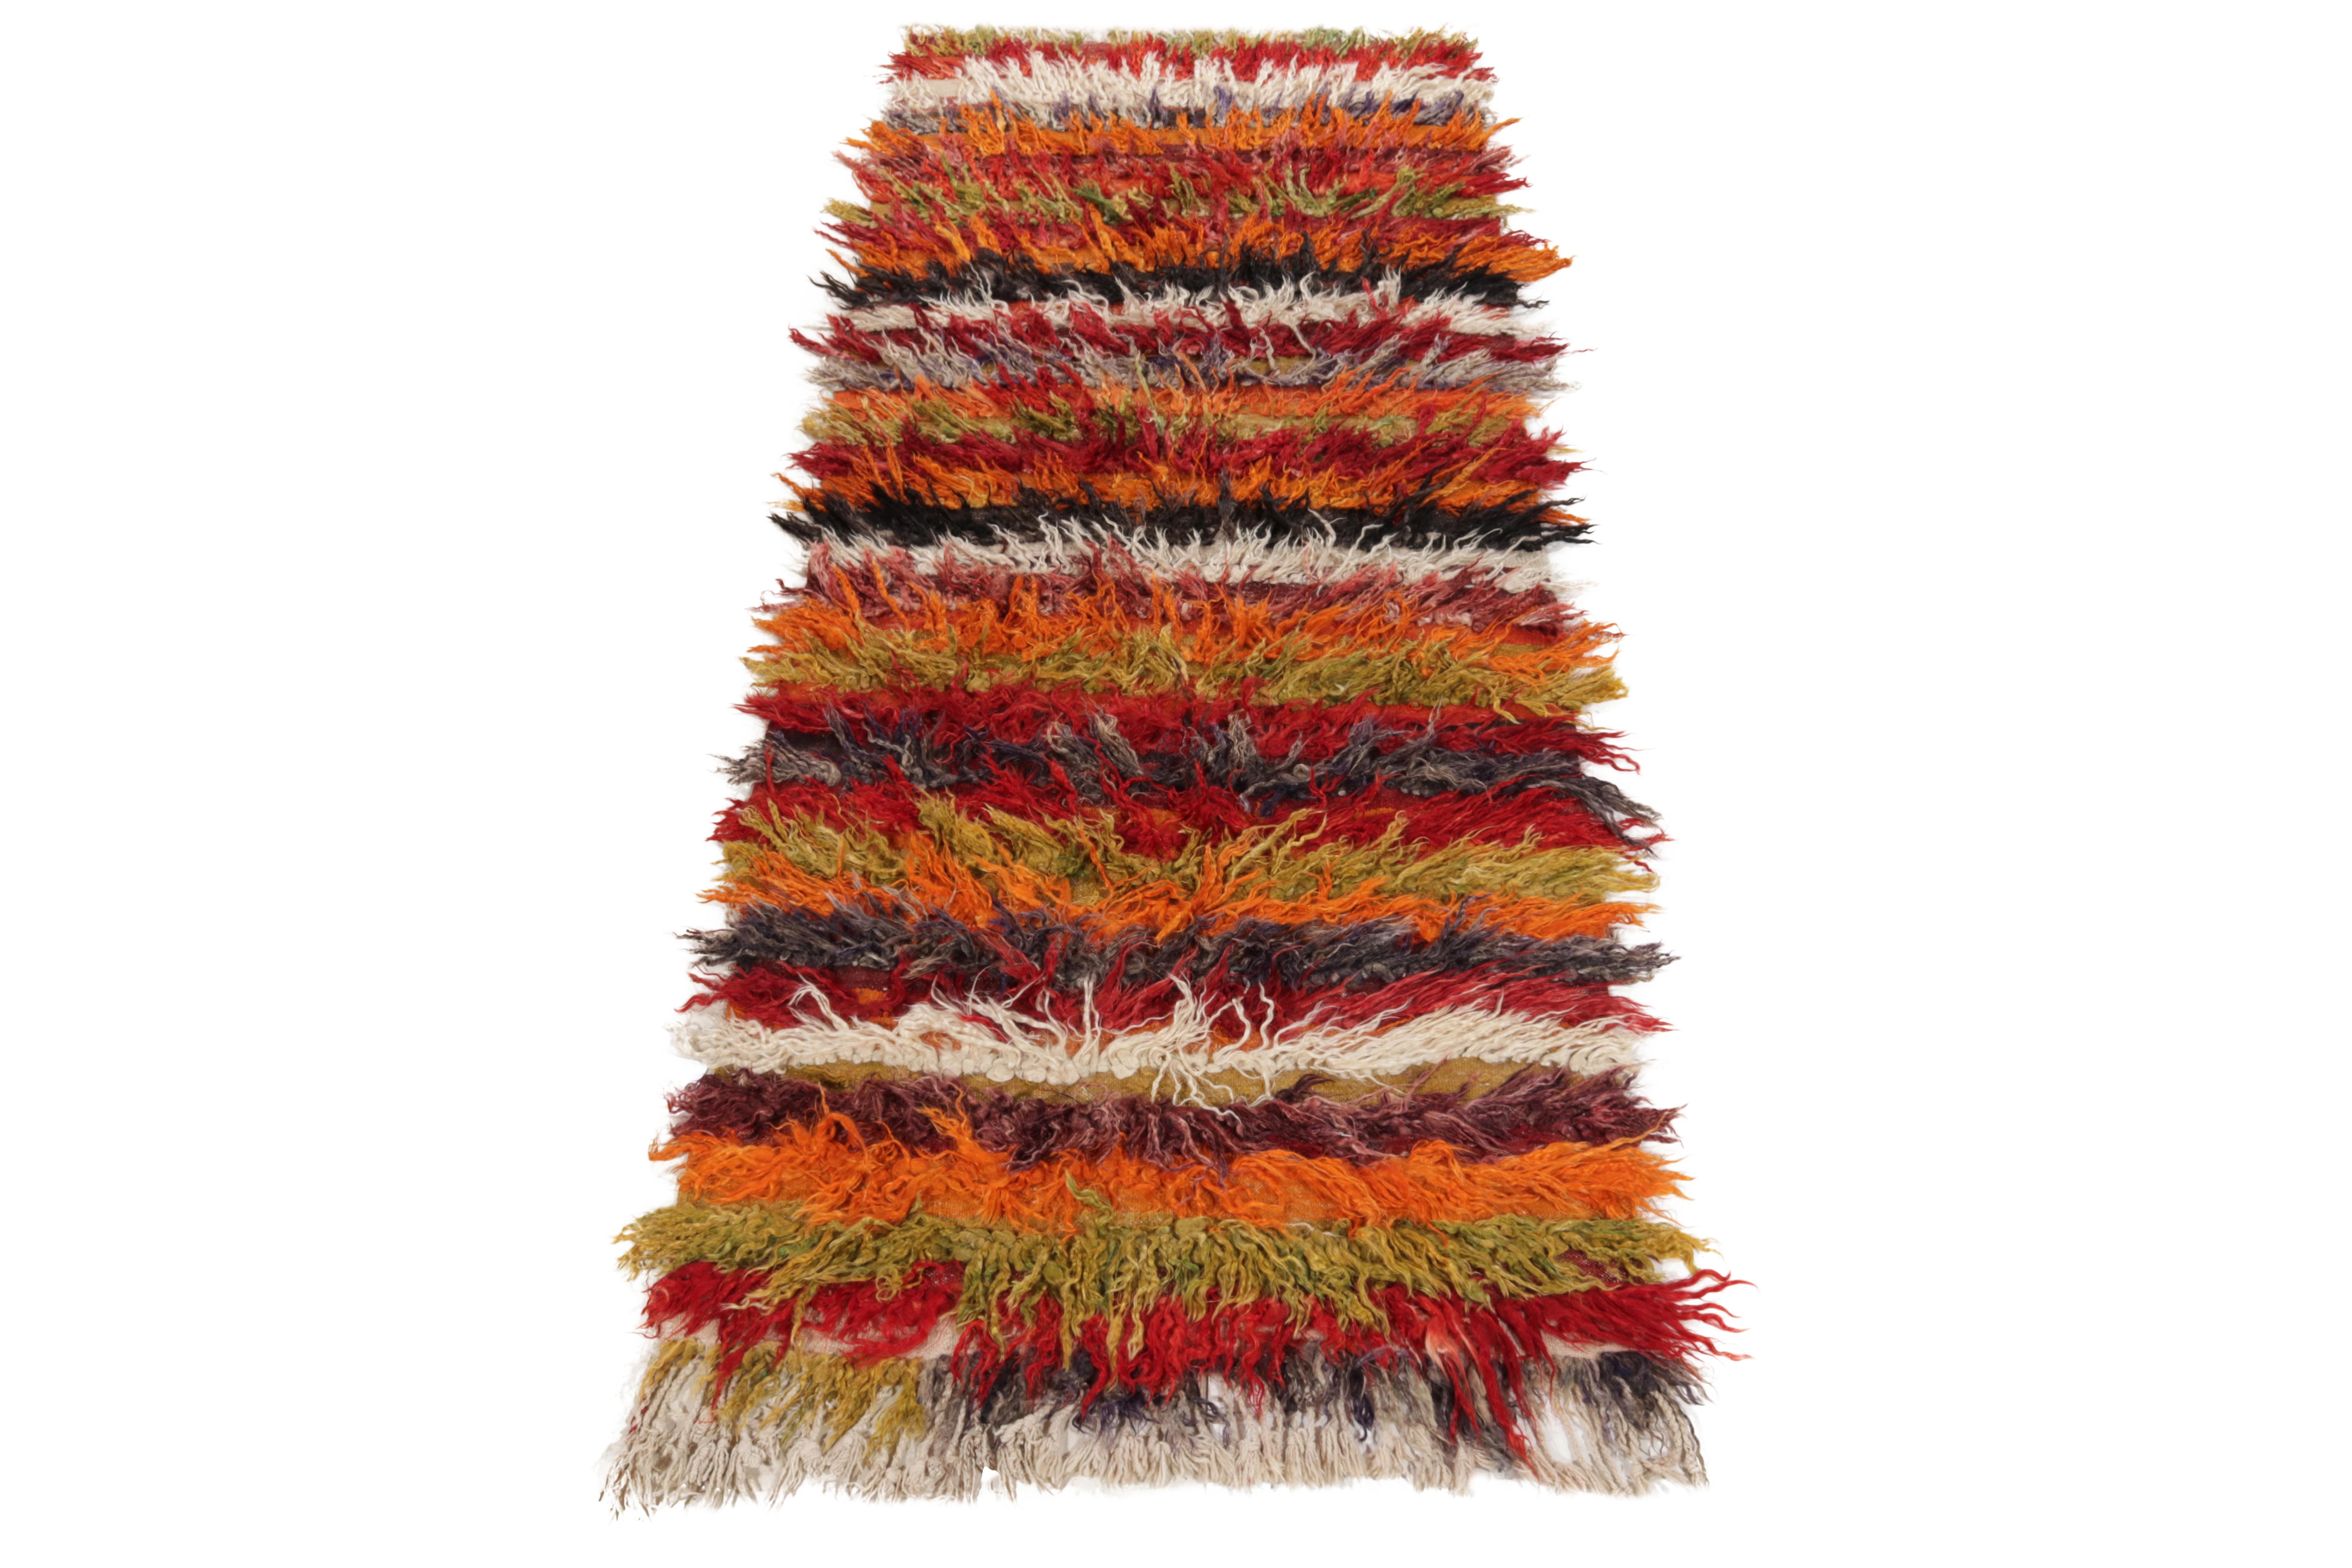 Hand-knotted in wool circa 1950-1960, this 4x10 vintage rug enjoys a delicious high pile in bold red, lavender, tangerine & grass green playing joyfully with Tulu aesthetics of the mid century era. Thriving in pristine condition, a textural piece